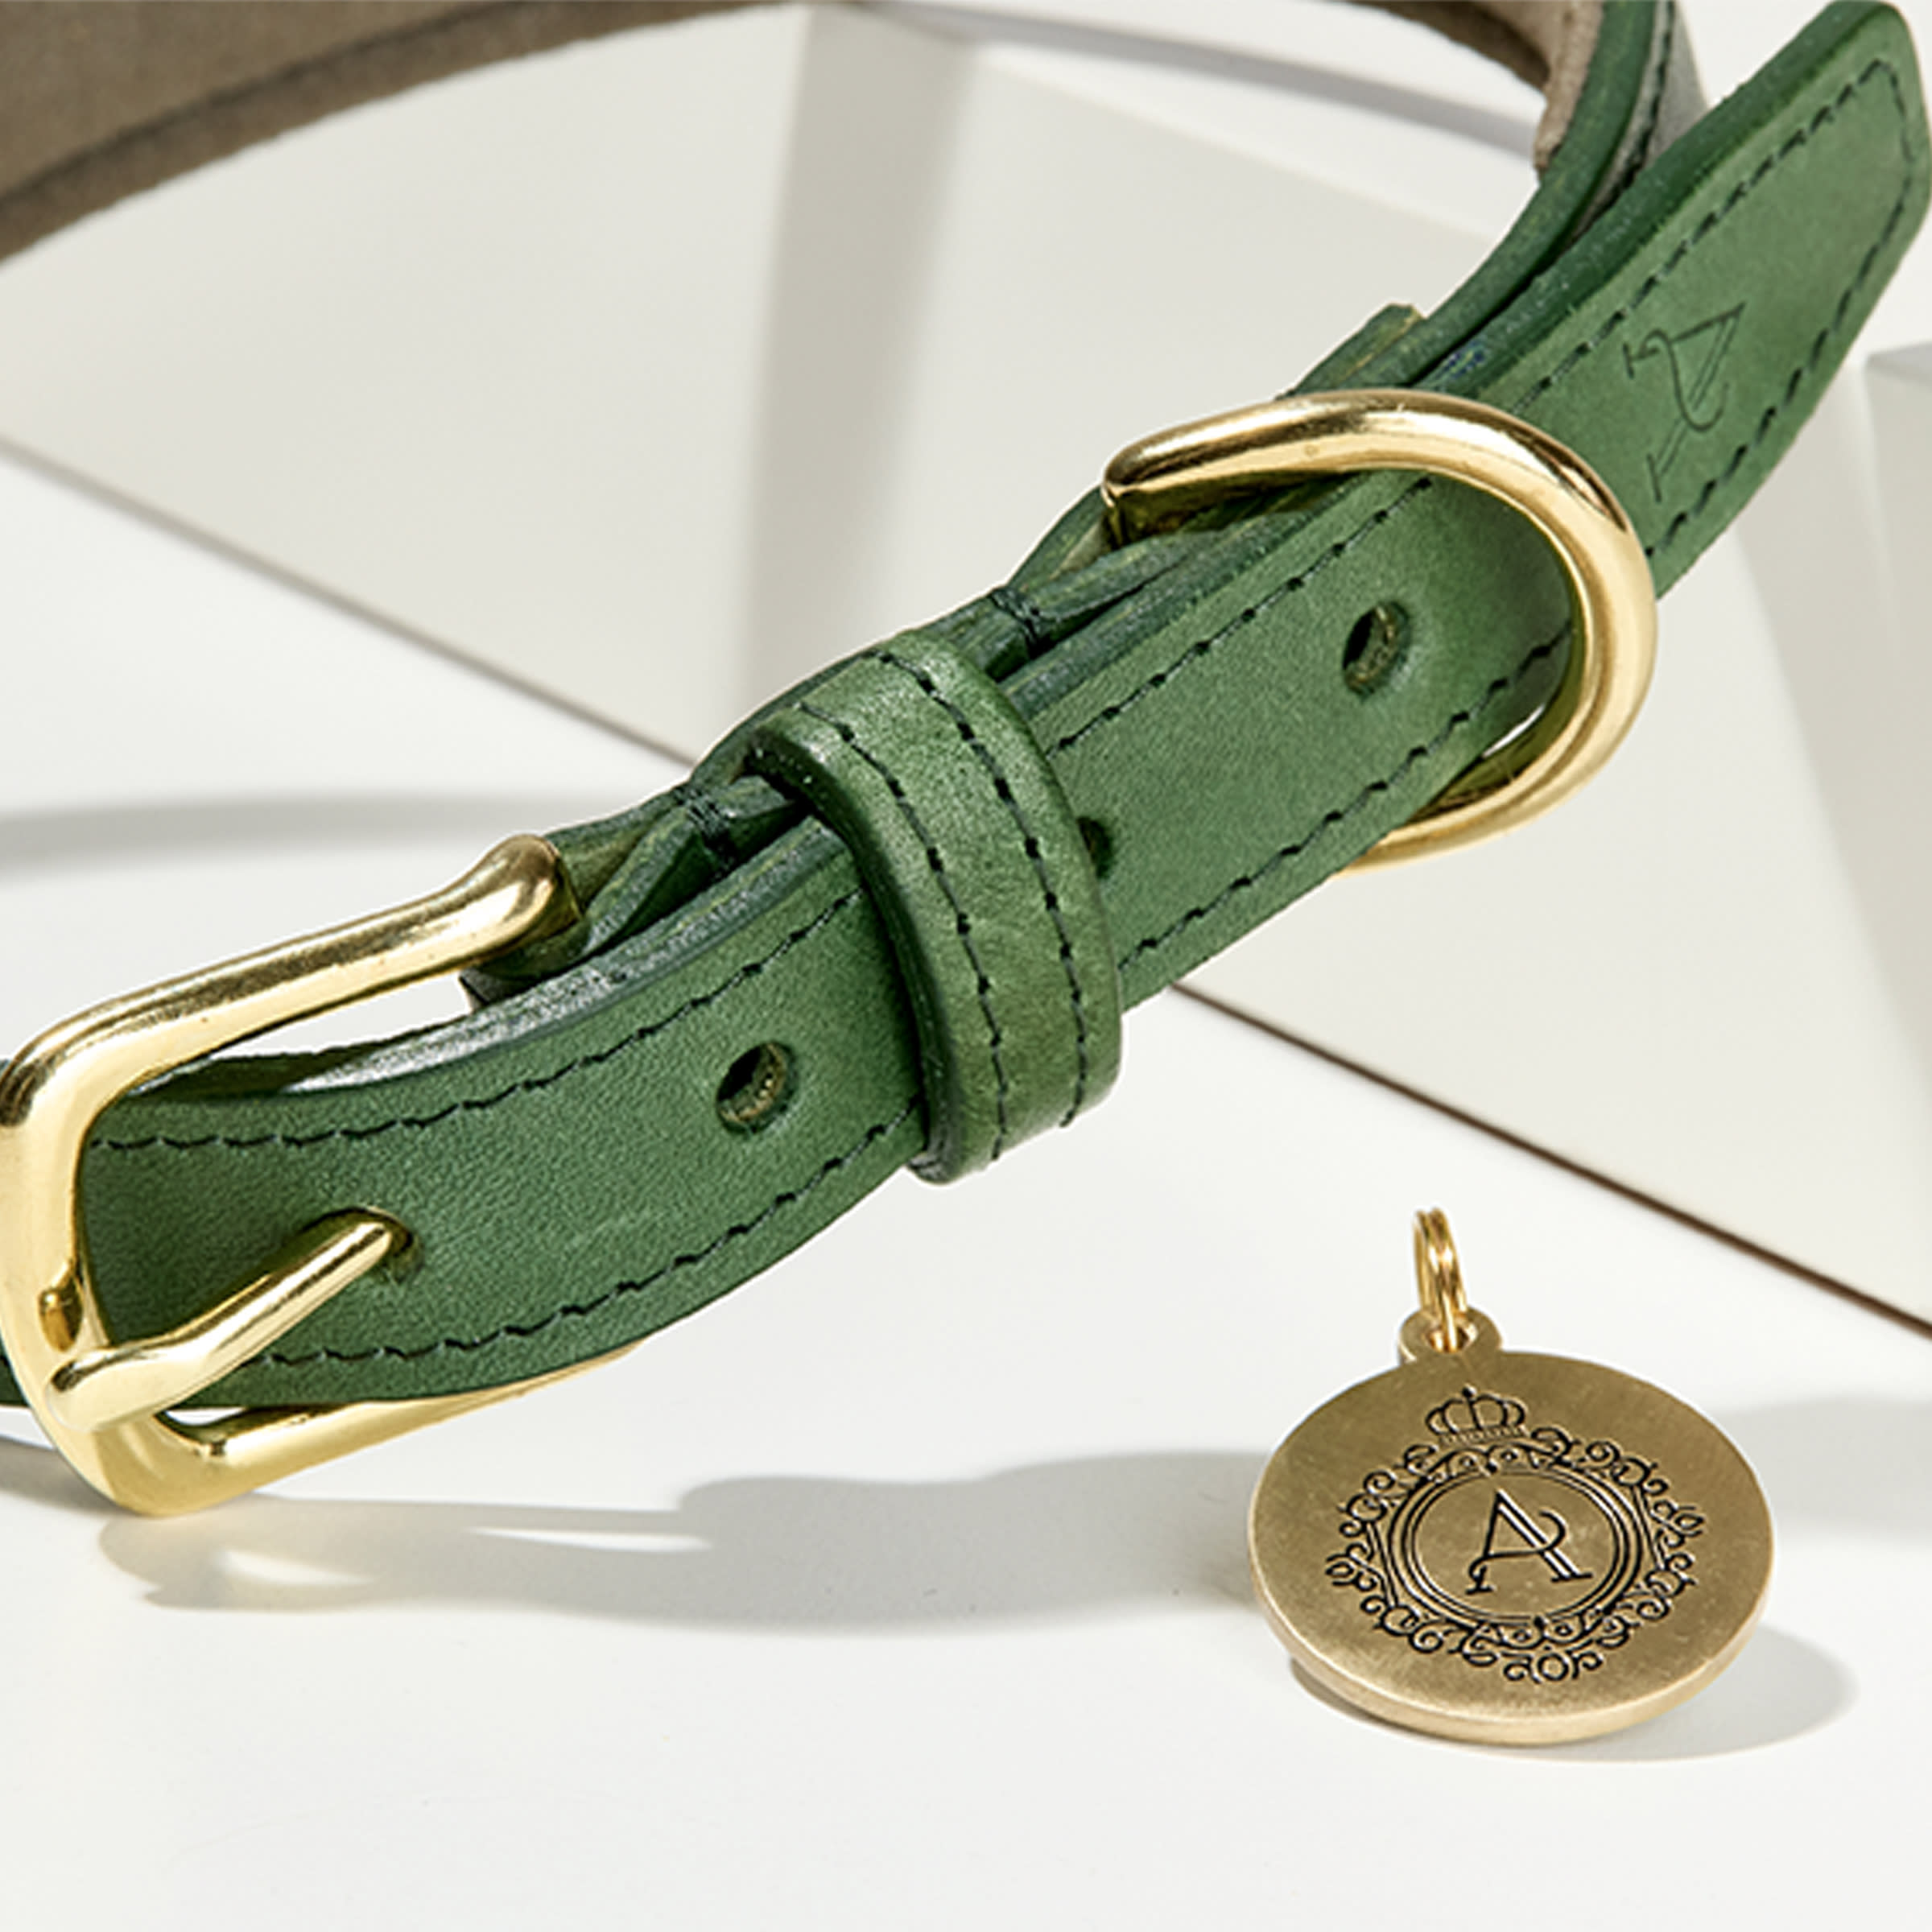 Padded Leather Dog Collar (Green)